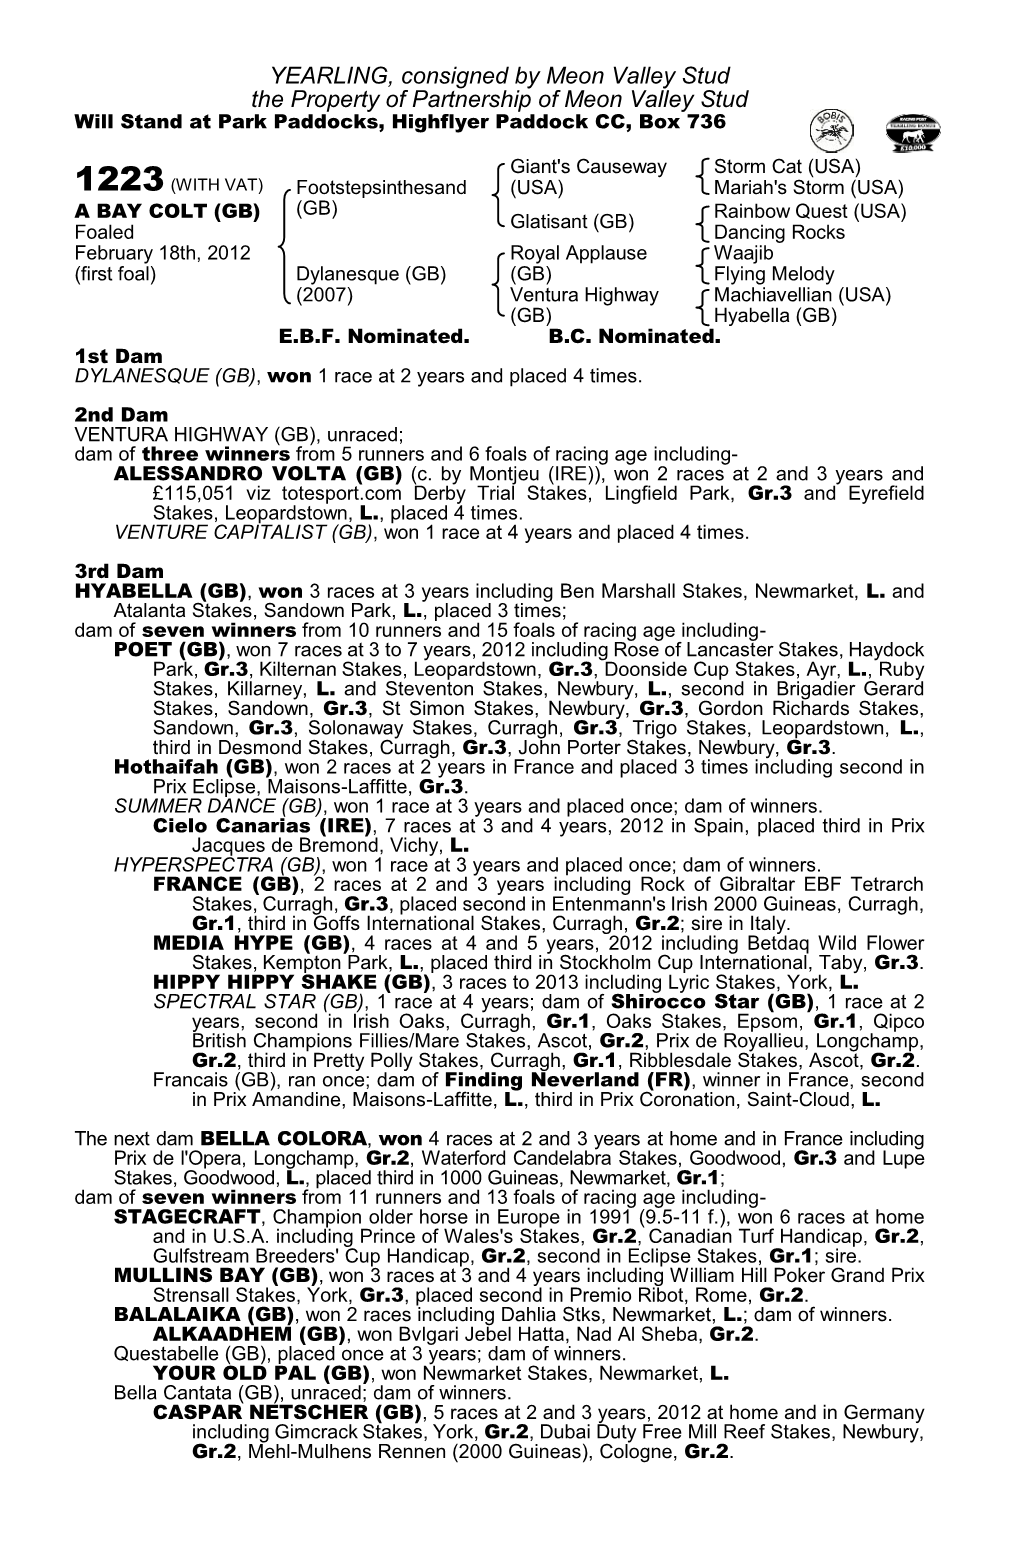 YEARLING, Consigned by Meon Valley Stud the Property of Partnership of Meon Valley Stud Will Stand at Park Paddocks, Highflyer Paddock CC, Box 736